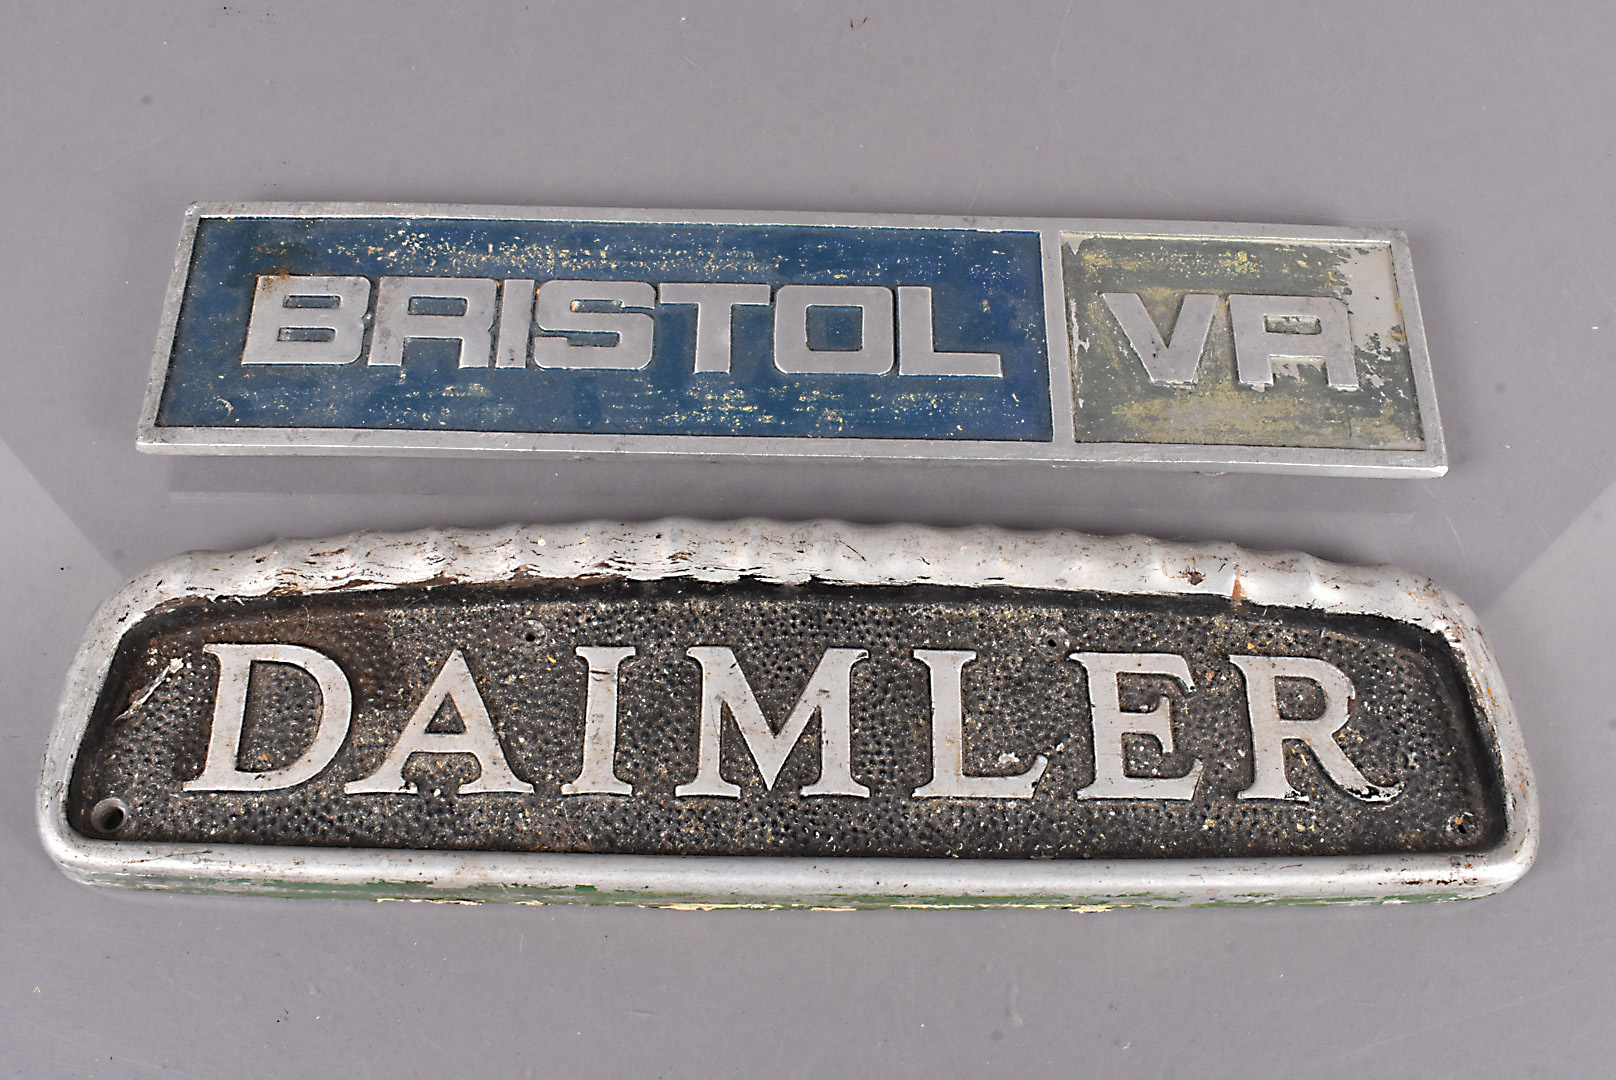 Two vintage Bus Maker's Plates, one for a Bristol VR and the other Daimler (2)